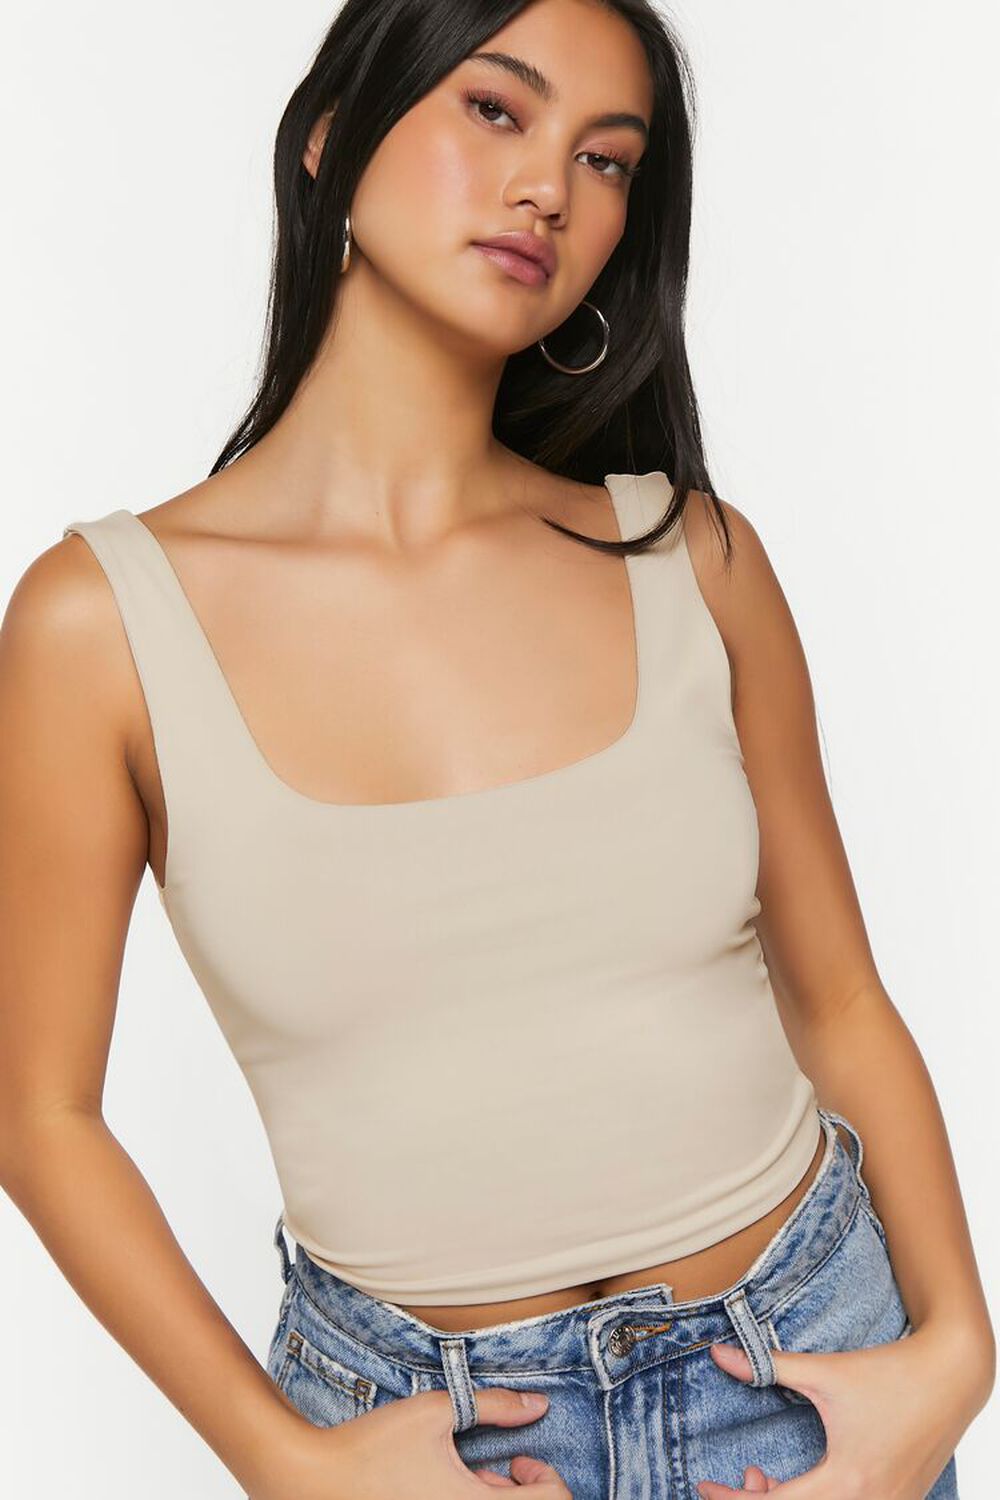 NEUTRAL GREY Cropped Tank Top, image 1